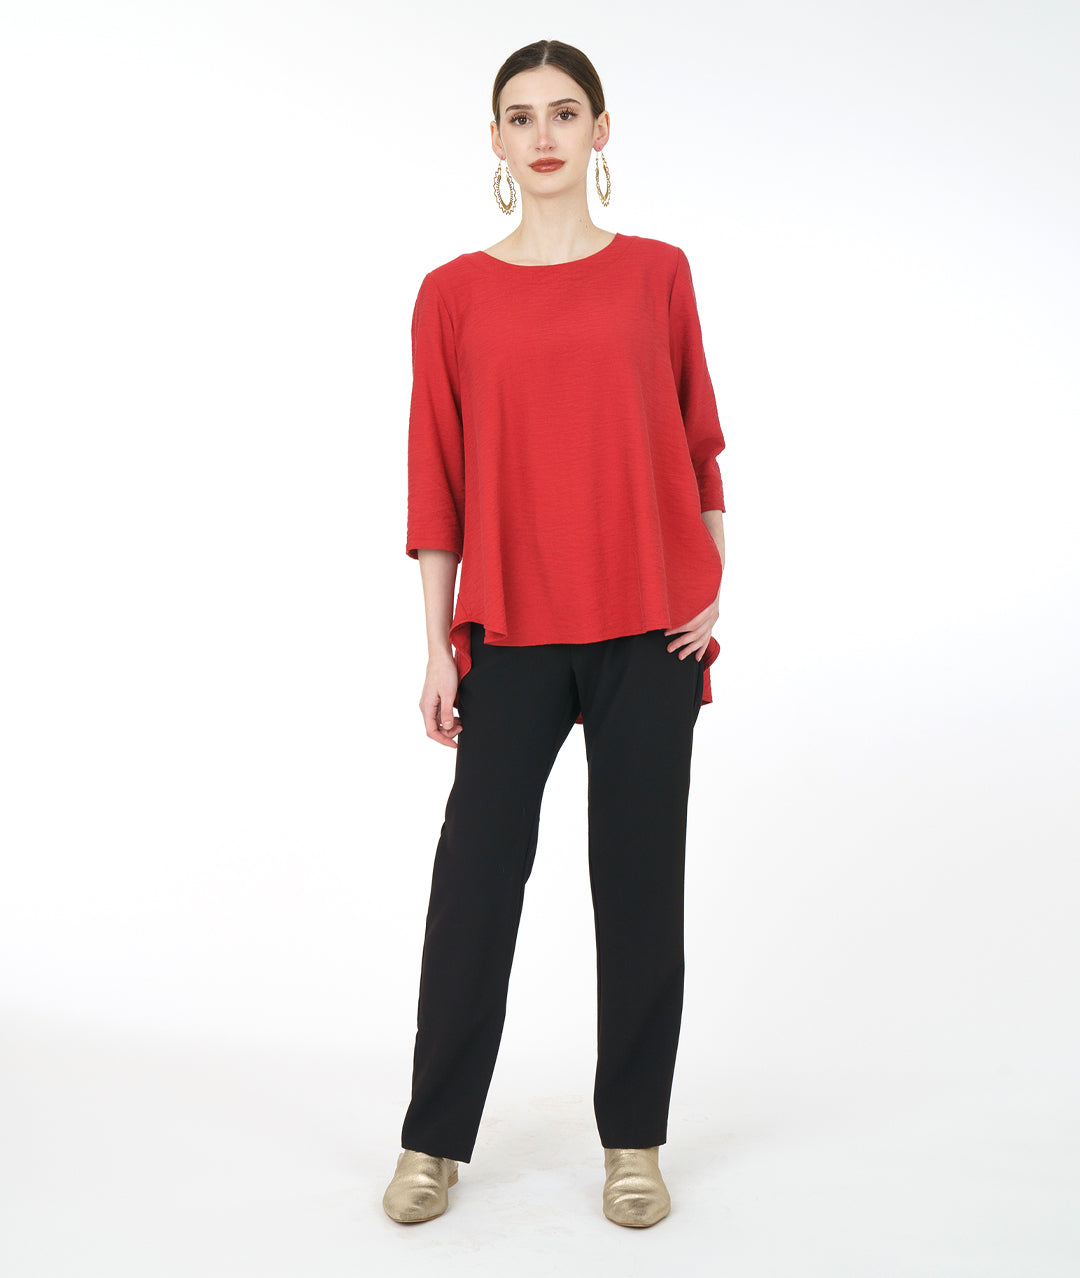 model in a red top and black straight leg pant with a flat front and darts